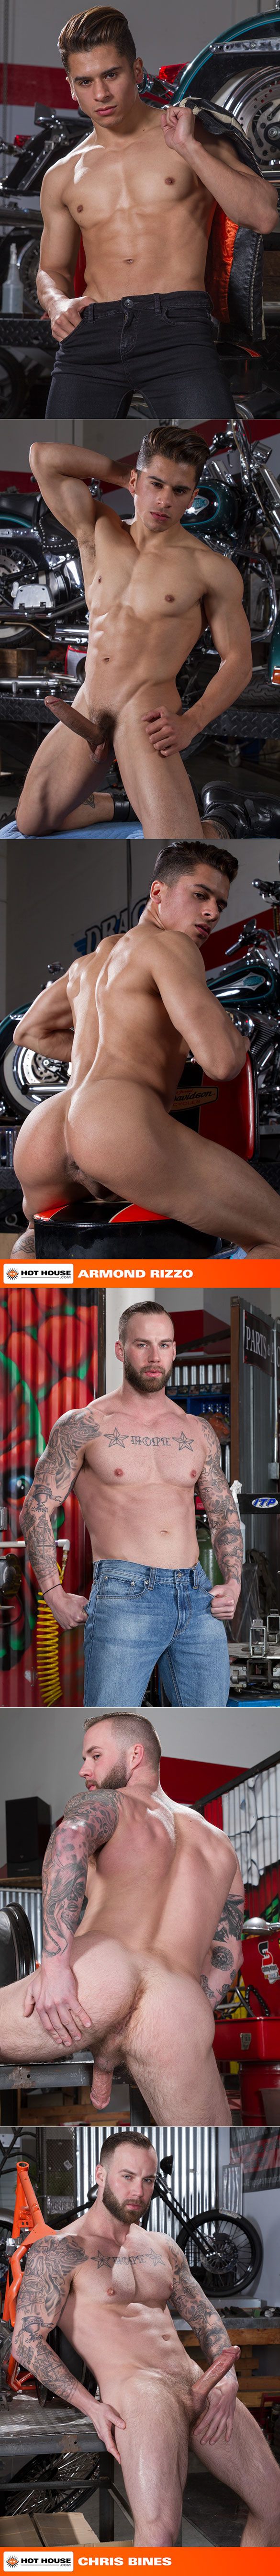 HotHouse: Armond Rizzo gets pounded by Chris Bines in "Ride It"